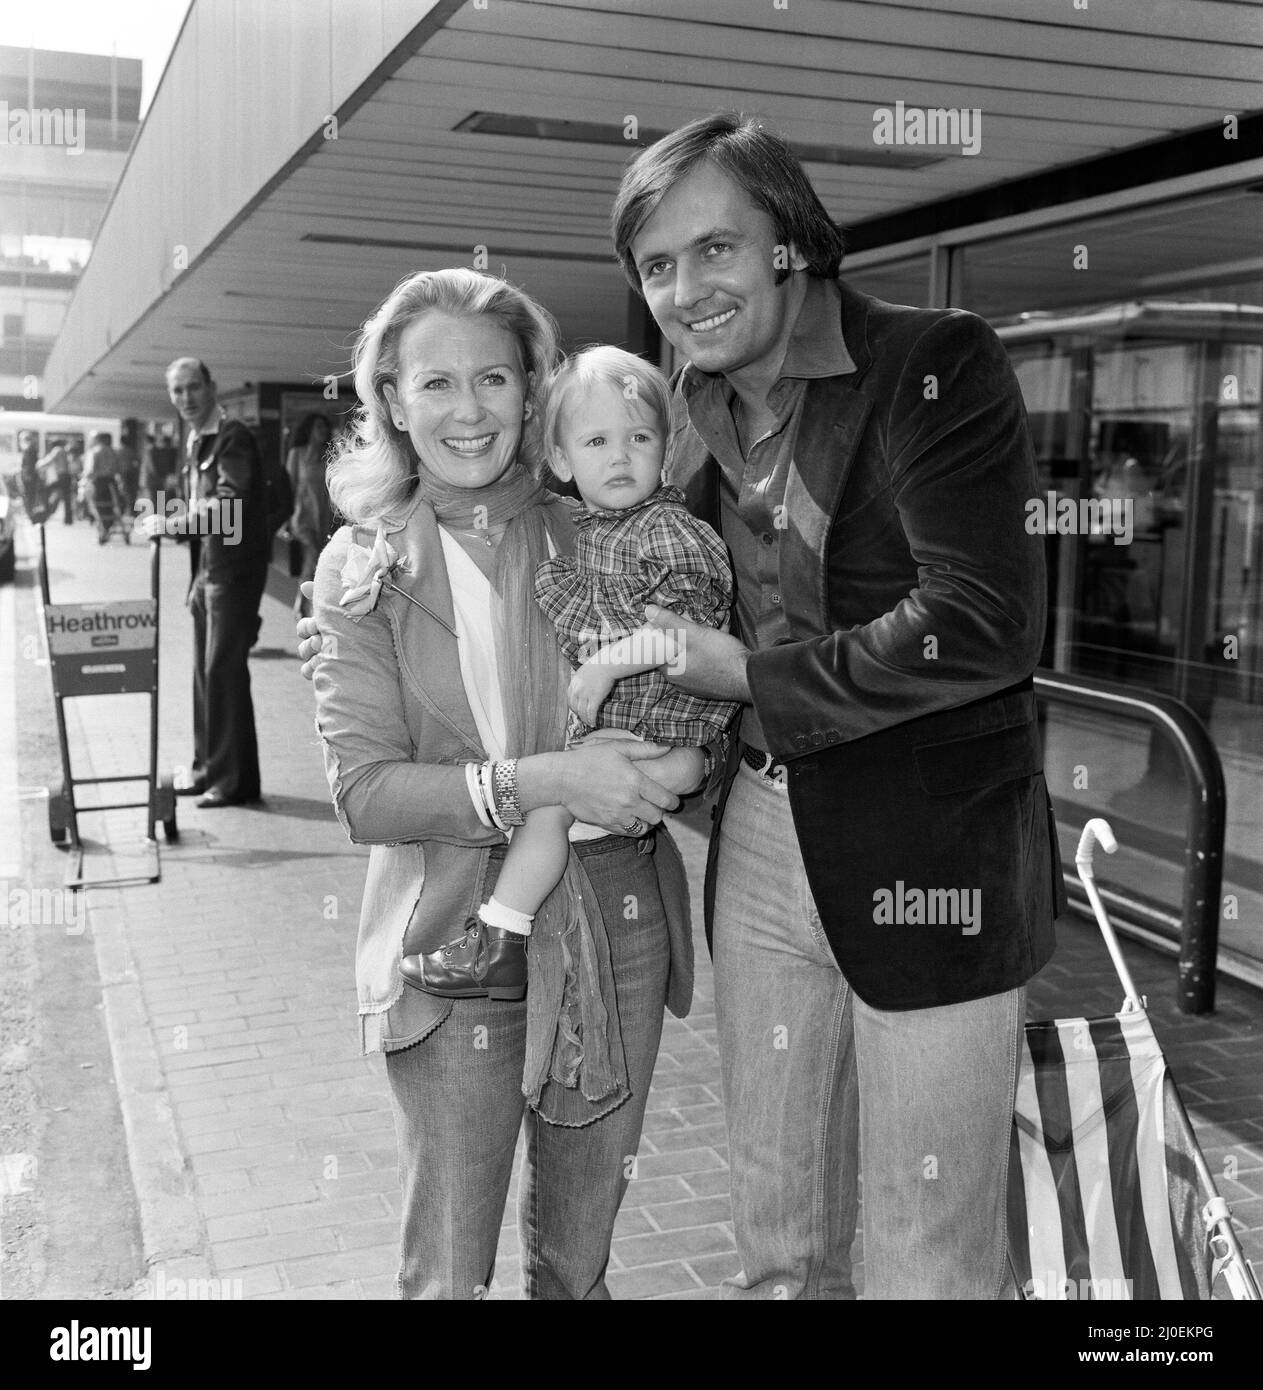 Juliet Mills with her daughter Melissa, aged one, and her husband Michael Miklenda leaving Heathrow Airport for New York. They have been here for a holiday, visiting Juliet's parents. 5th July 1979. Stock Photo